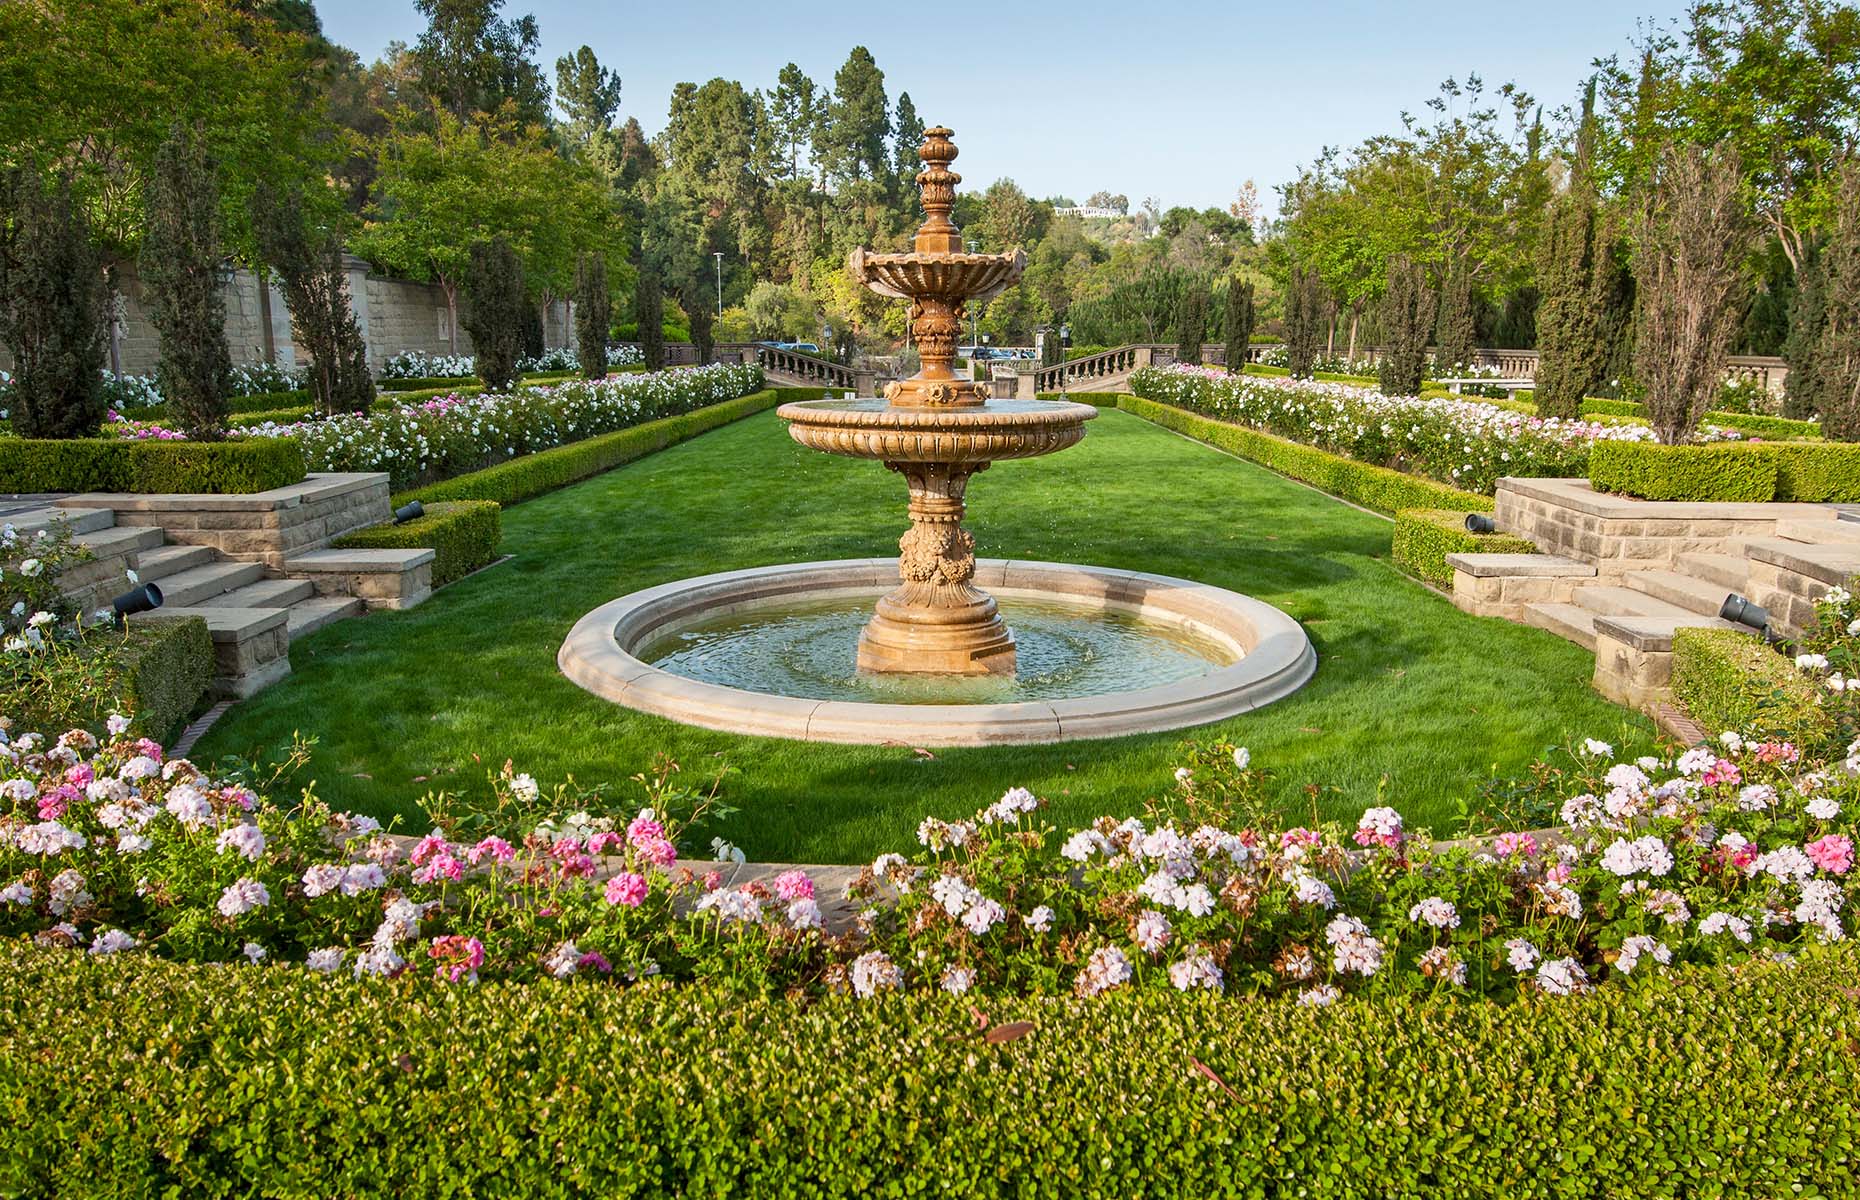 Greystone Mansion and Park in Beverly Hills (Image: Jamie Pham/Alamy Stock Photo)